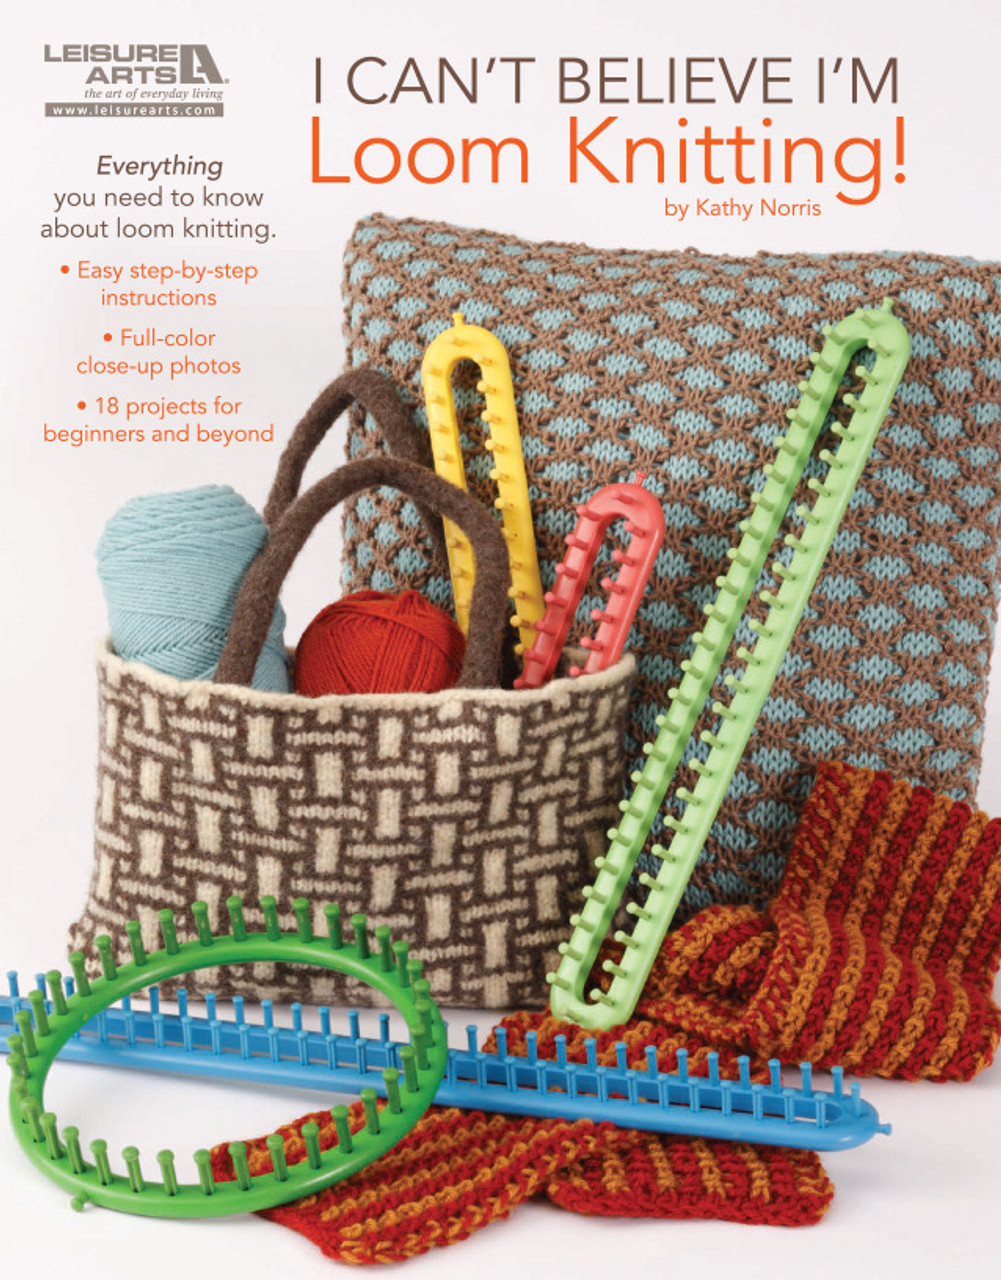 ISO a loom knitting pattern that could make a top like this!! All